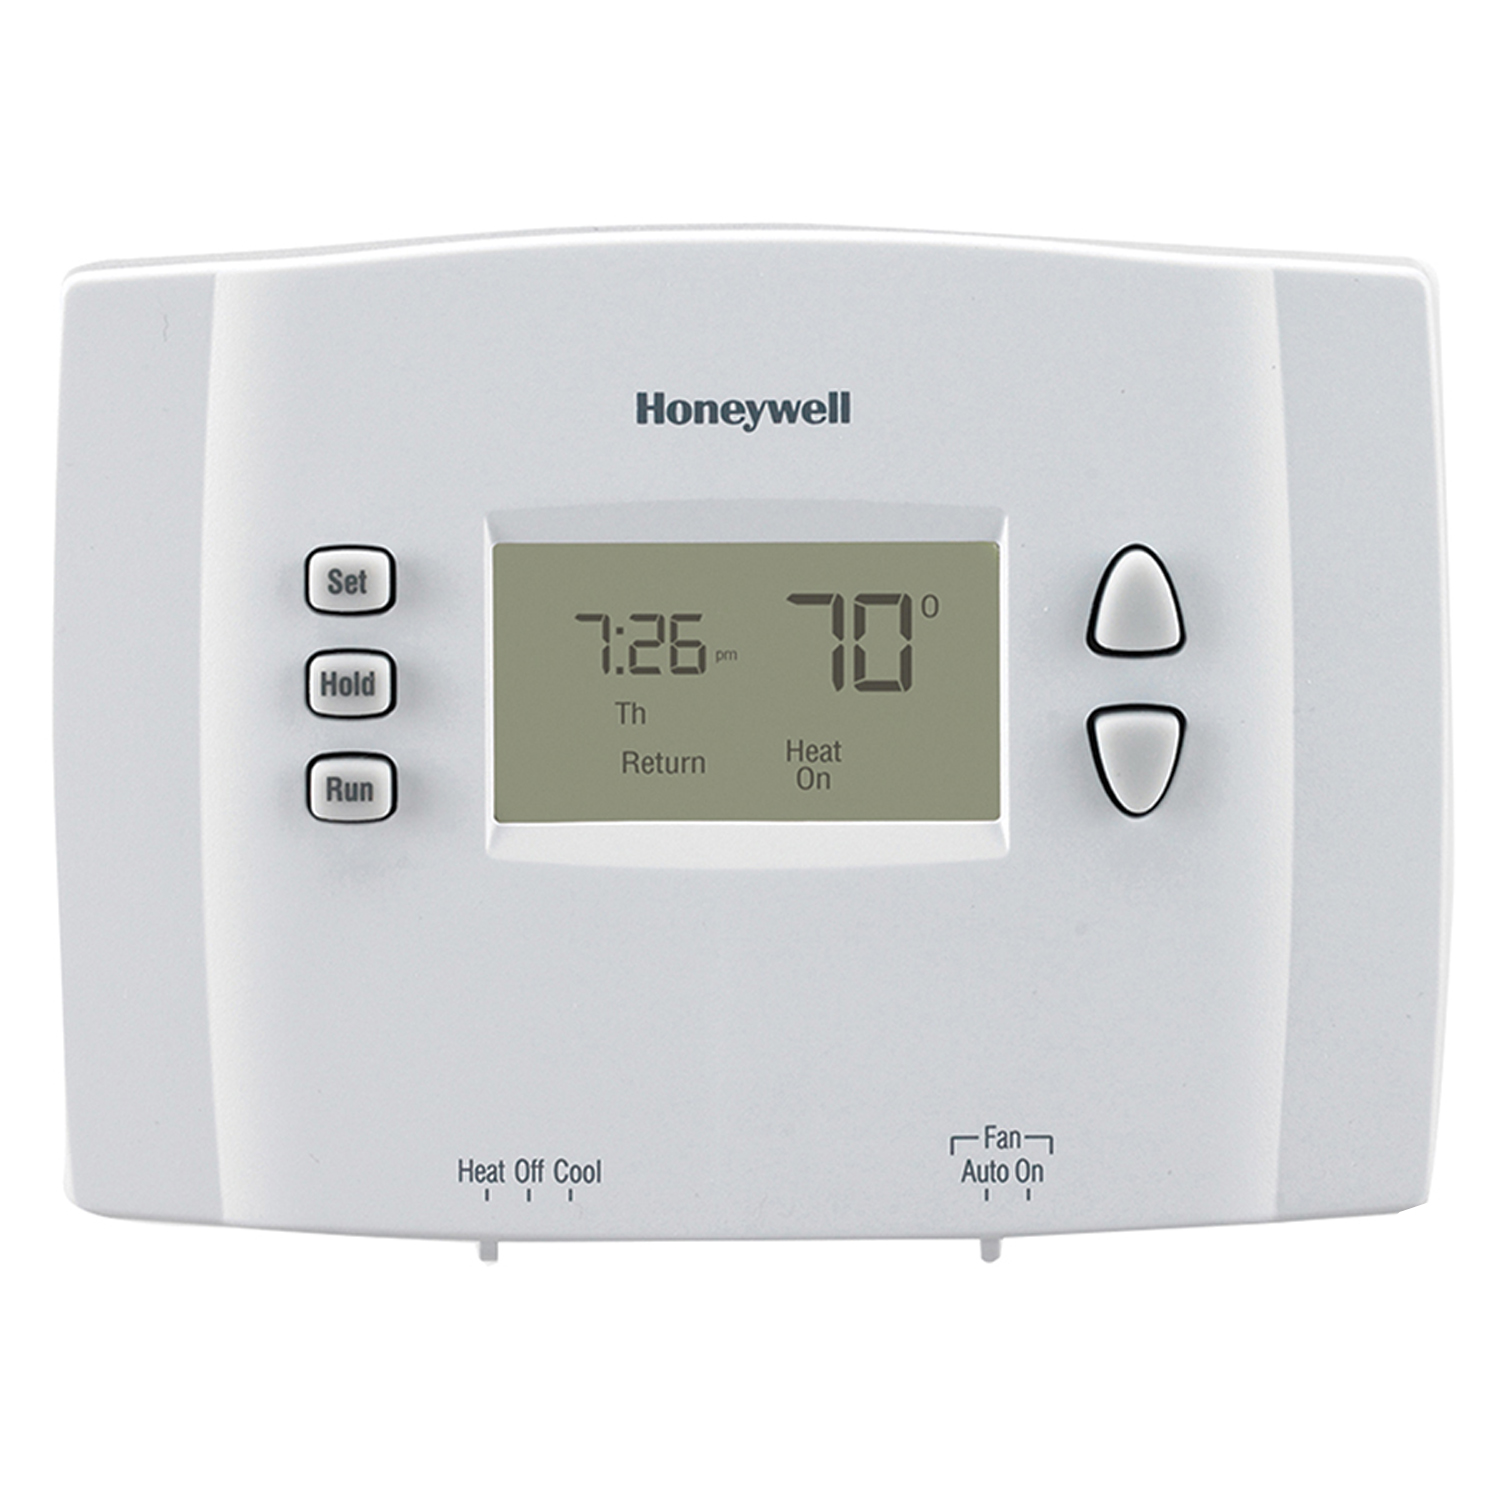 How To Fix Honeywell Thermostat How To Fix a Blank Honeywell Thermostat